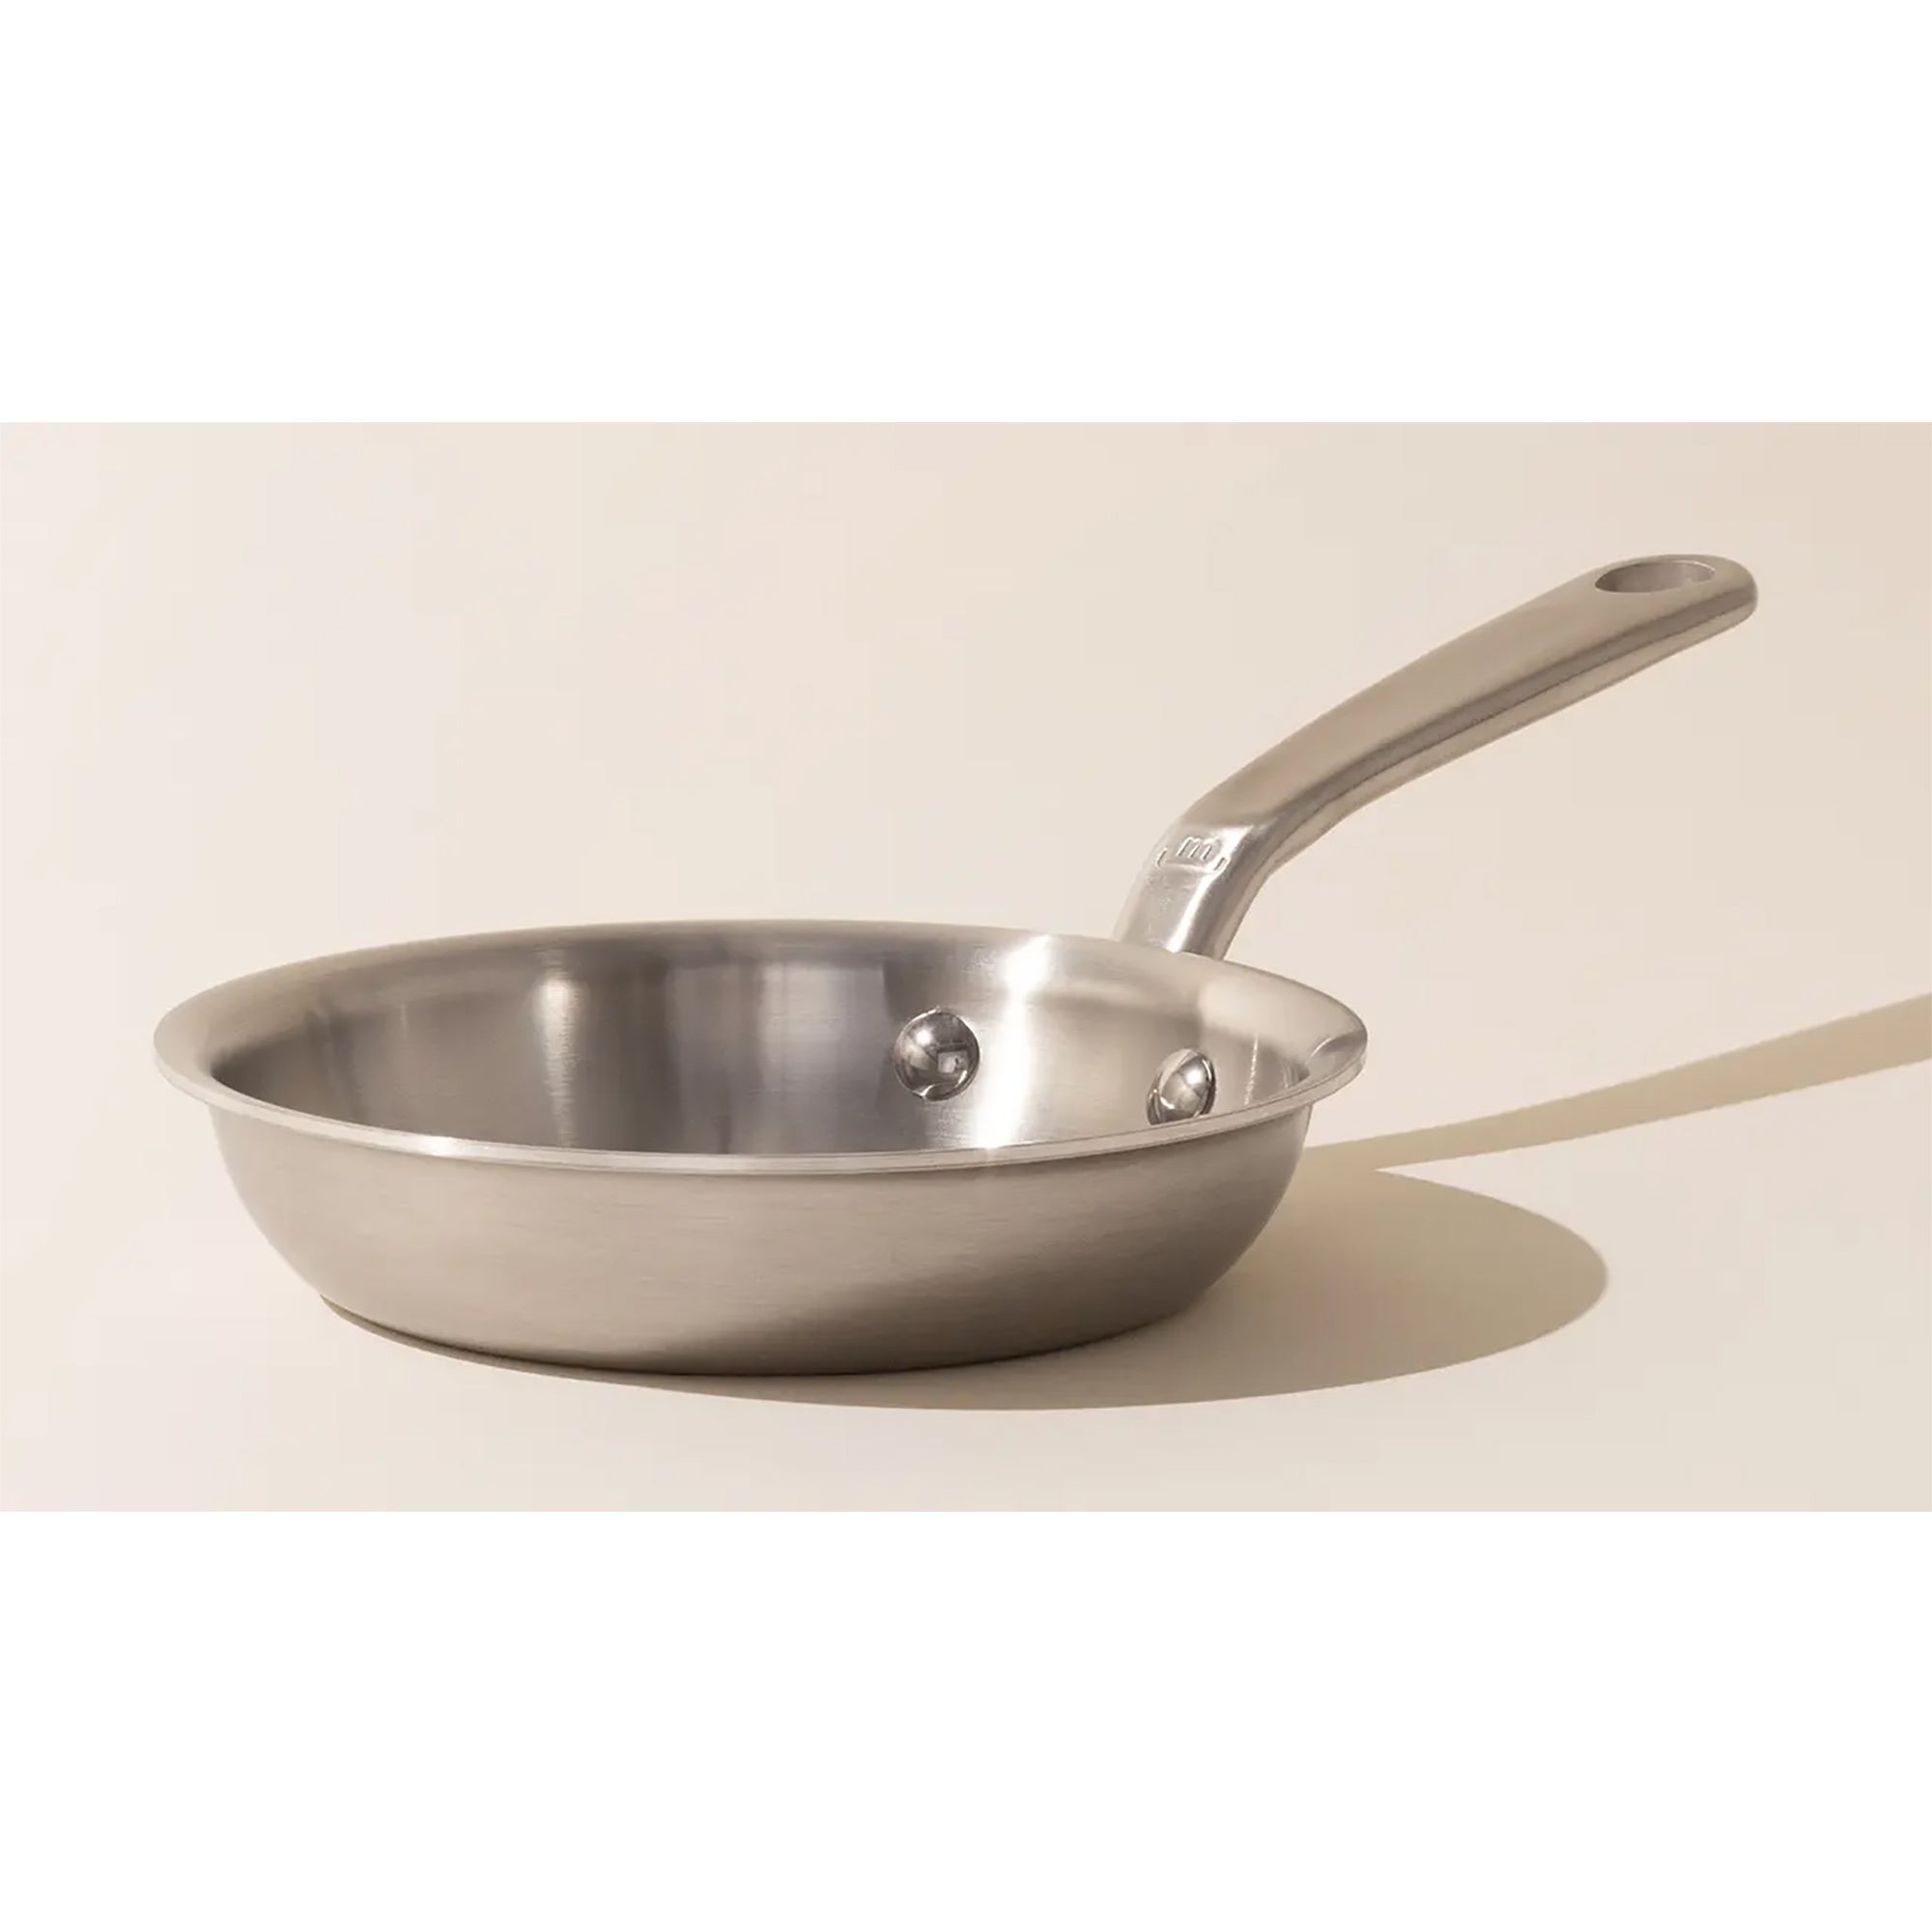 6" 5-Ply Stainless Clad Frying Pan